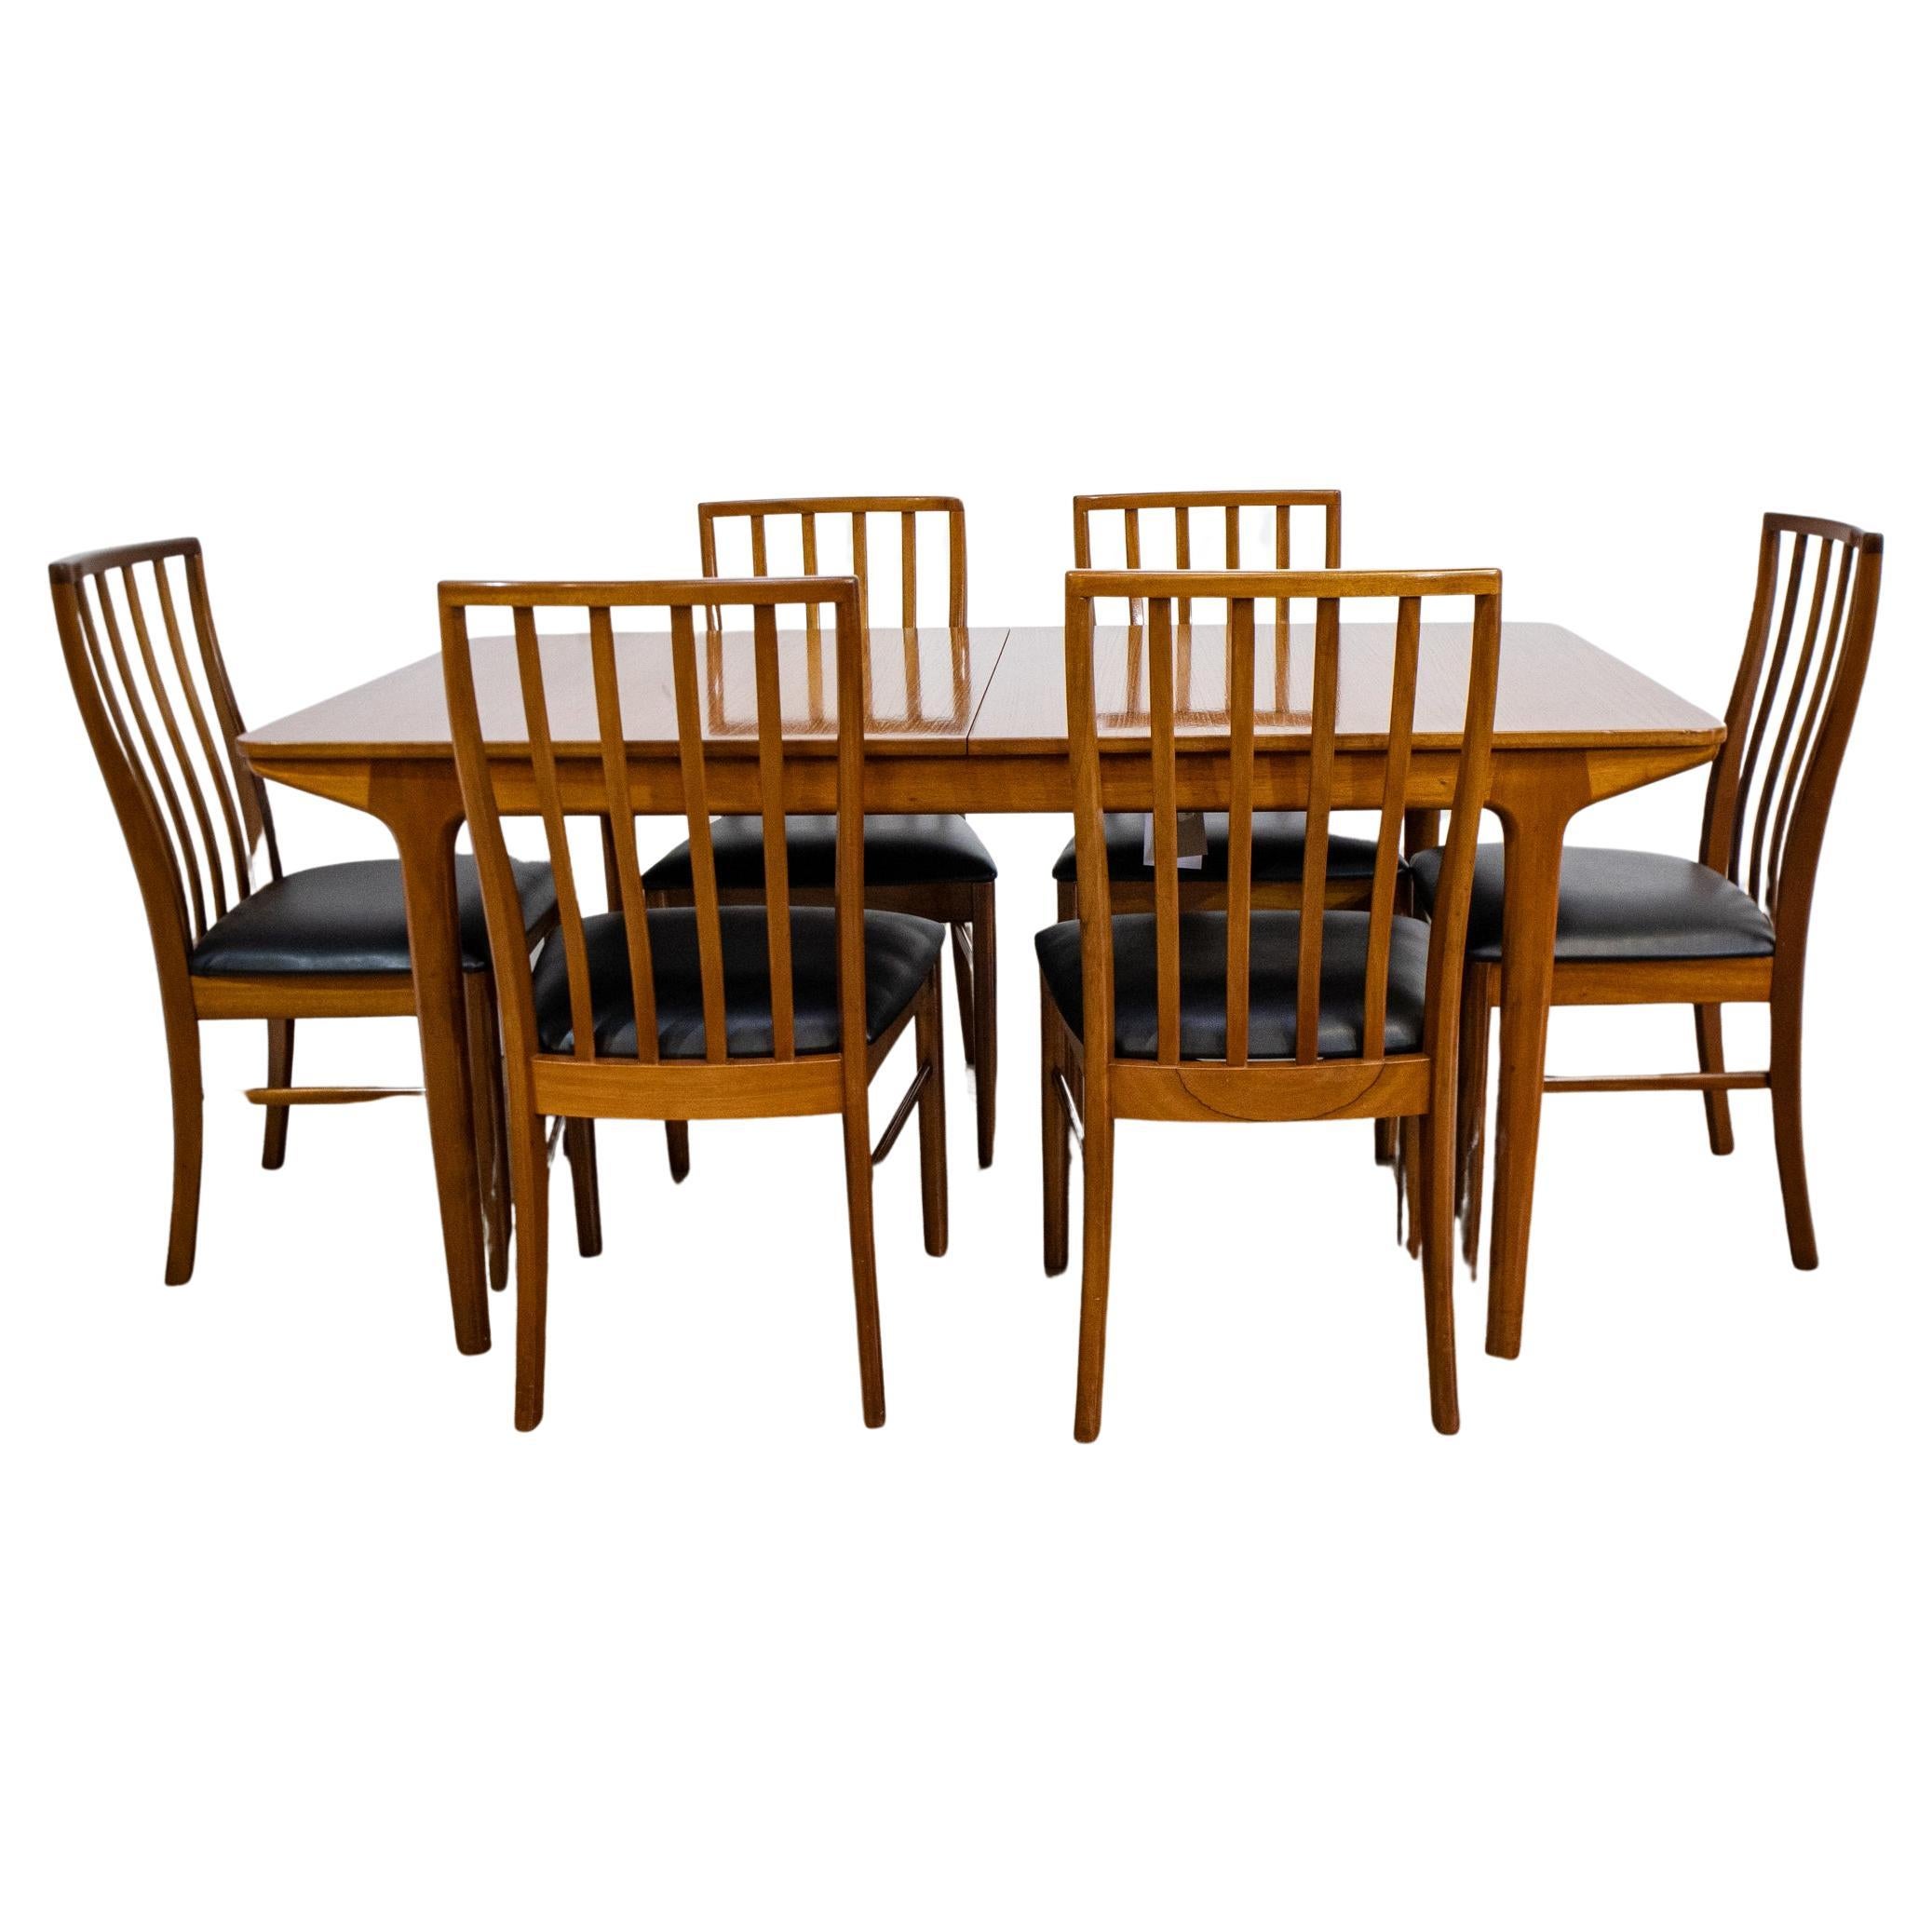 McIntosh Dining Table & Set of 6 Chairs